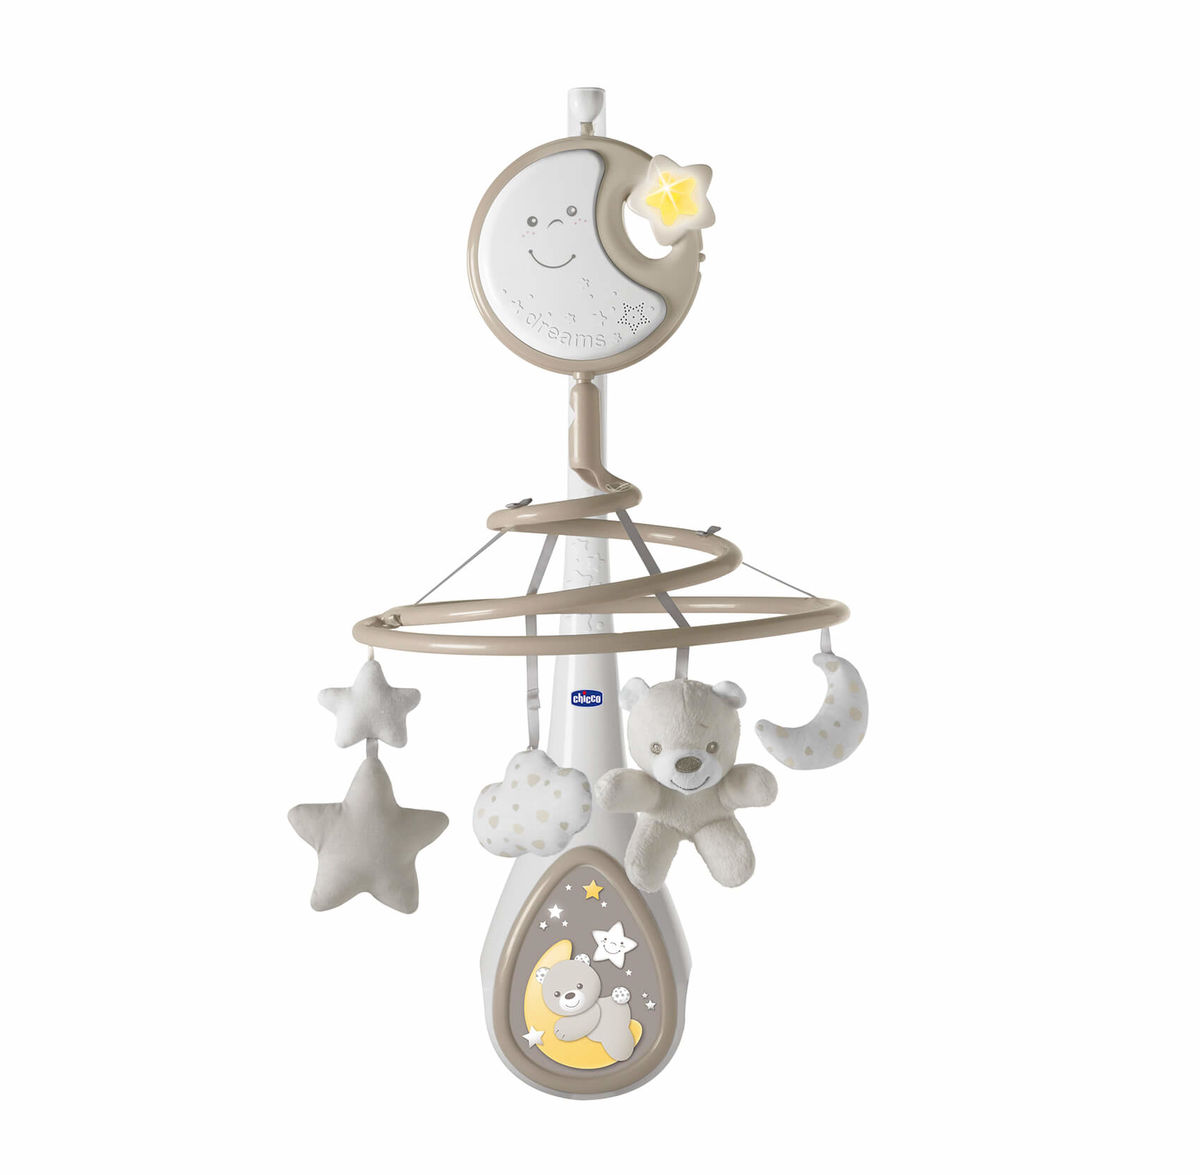 Image of Chicco First Dreams Next2Dreams Mobile grau bei nettoshop.ch